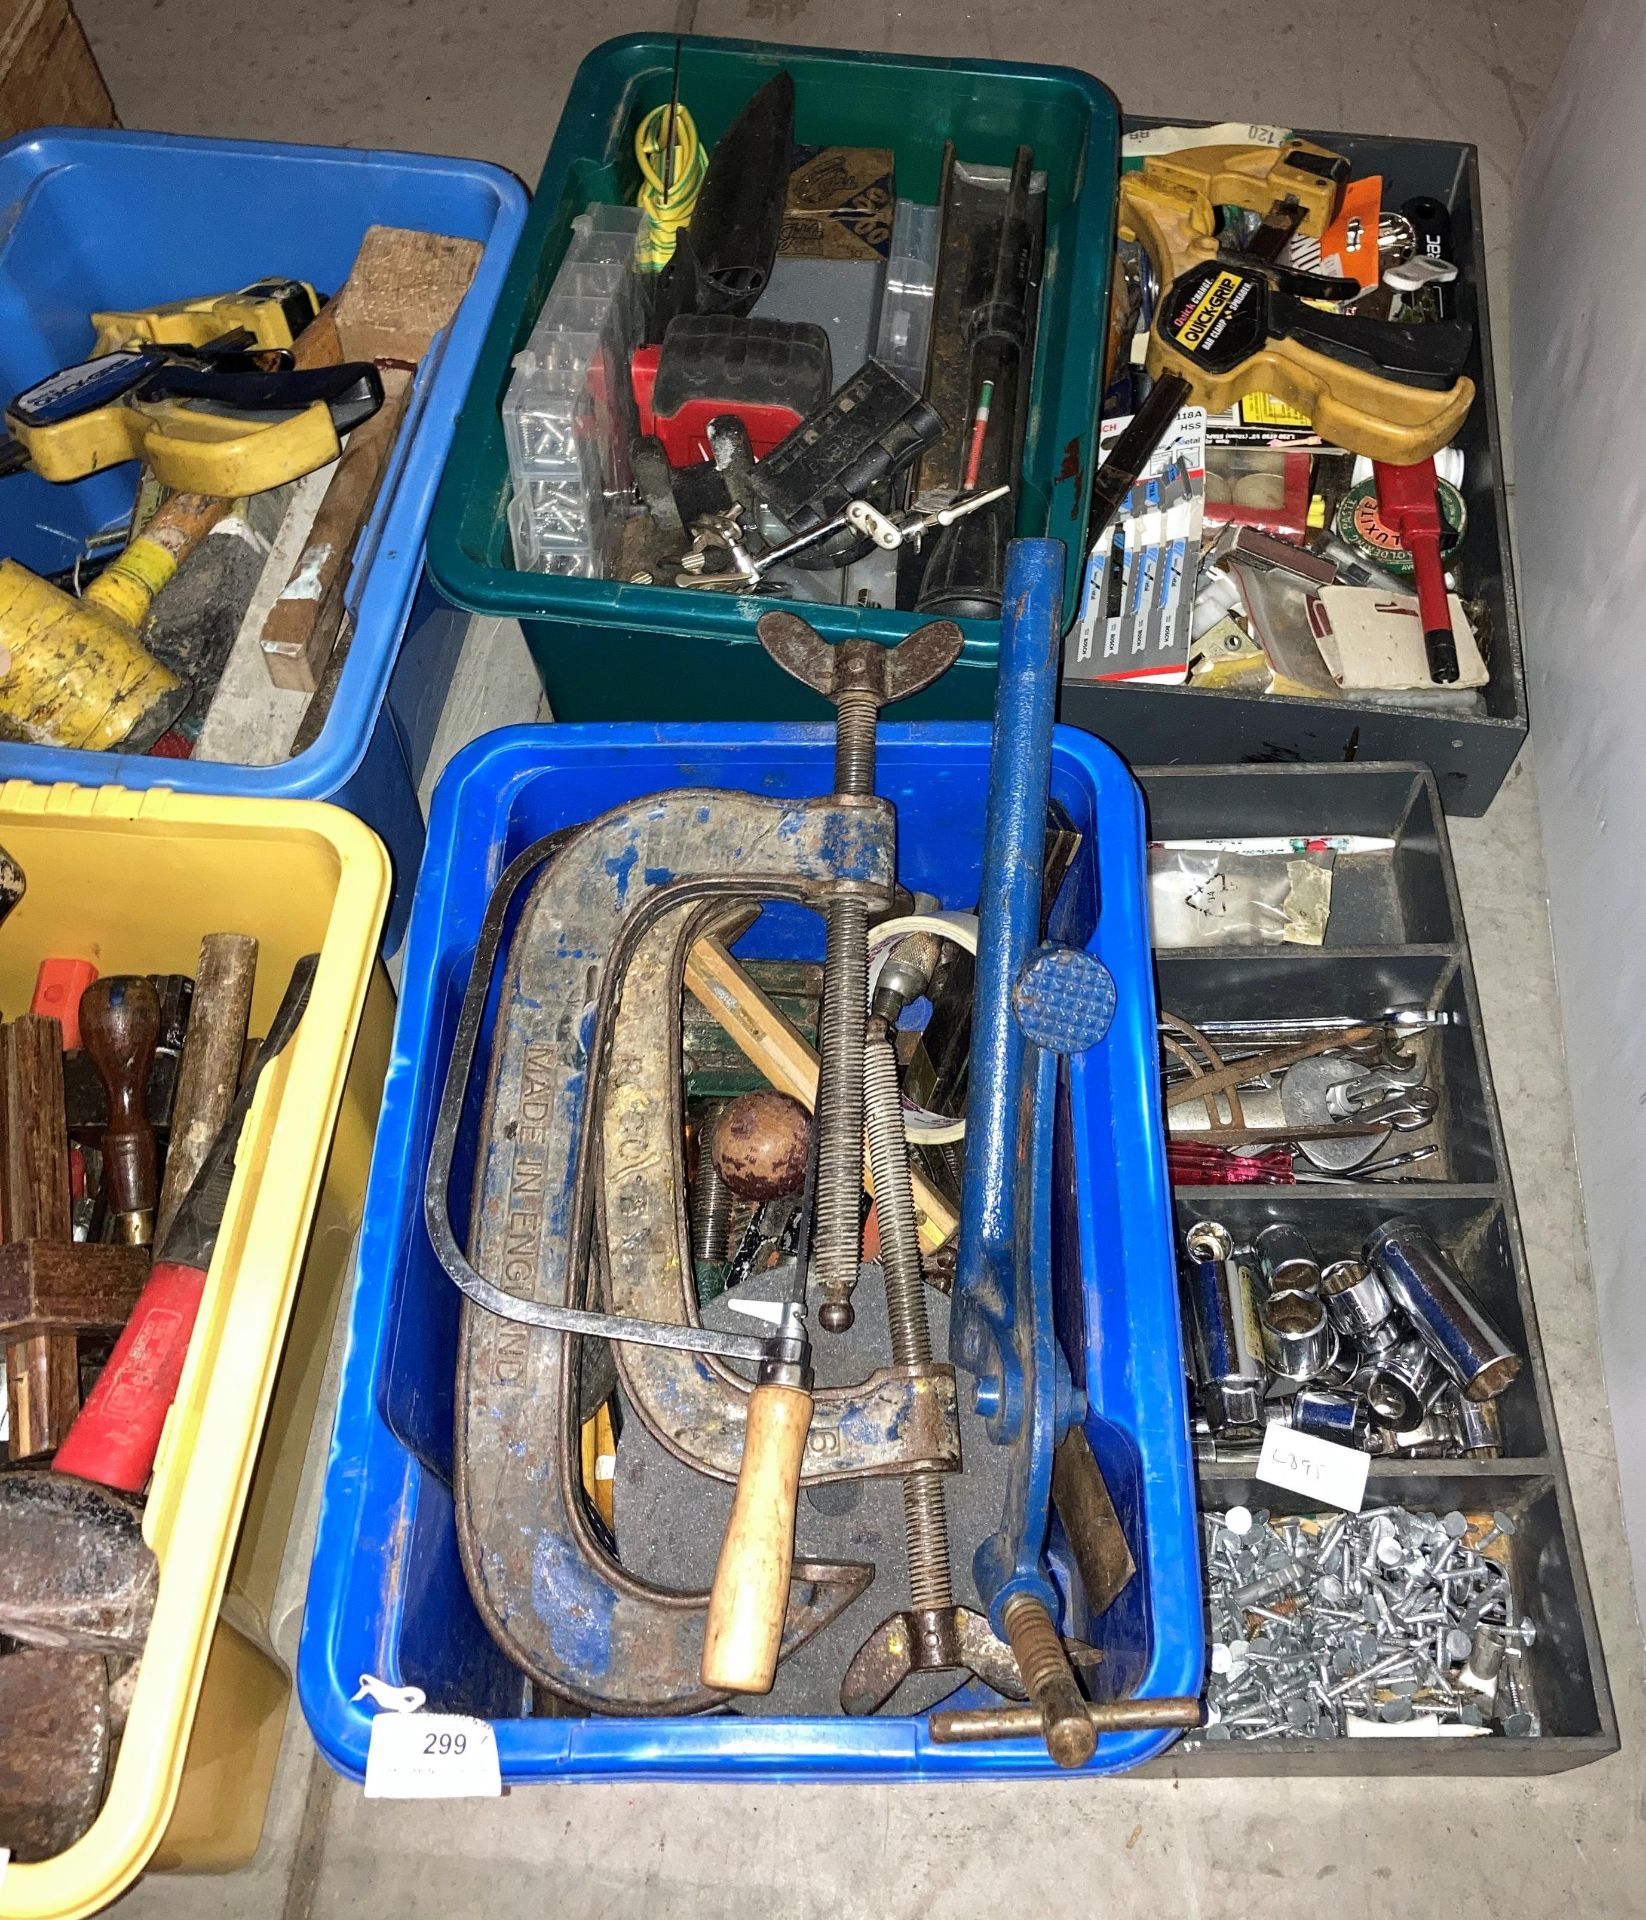 Contents to 8 x boxes and tool box - assorted hand tools, G-clamps, lump hammers, sockets, screws, - Image 2 of 3